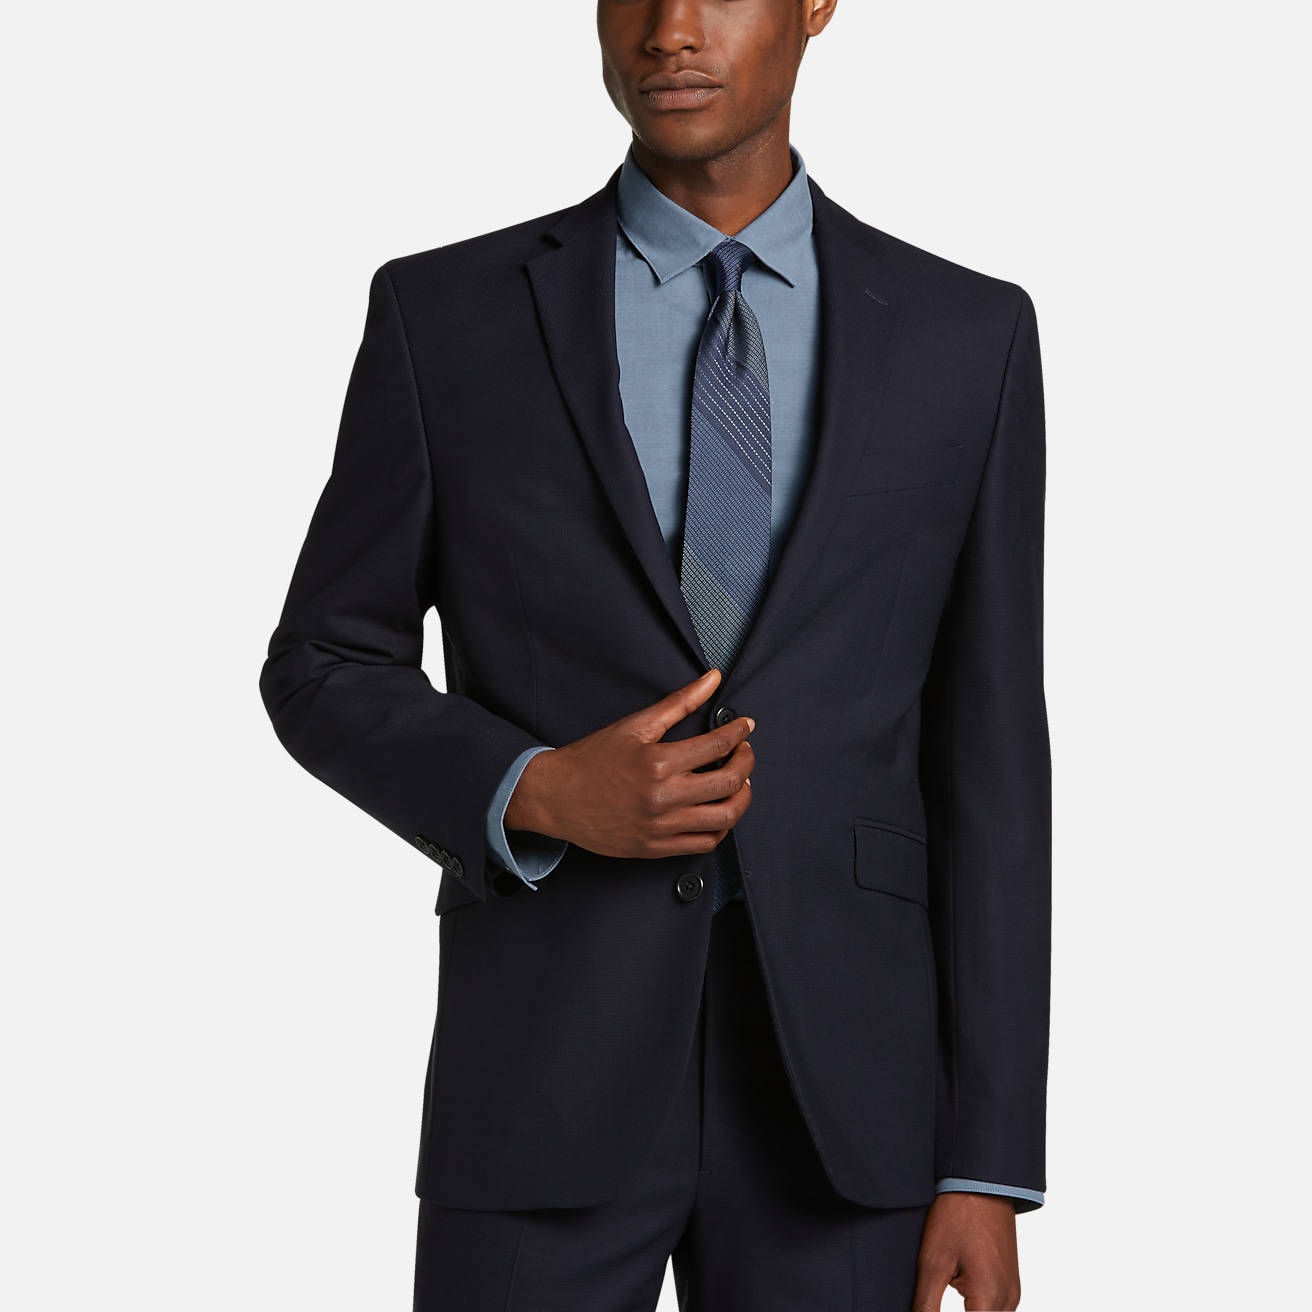 https://image.menswearhouse.com/is/image/TMW/TMW_3WET_94_WILKE_RODRIGUEZ_SUIT_SEPARATE_JACKETS_NAVY_TIC_MAIN?imPolicy=pdp-mob-2x